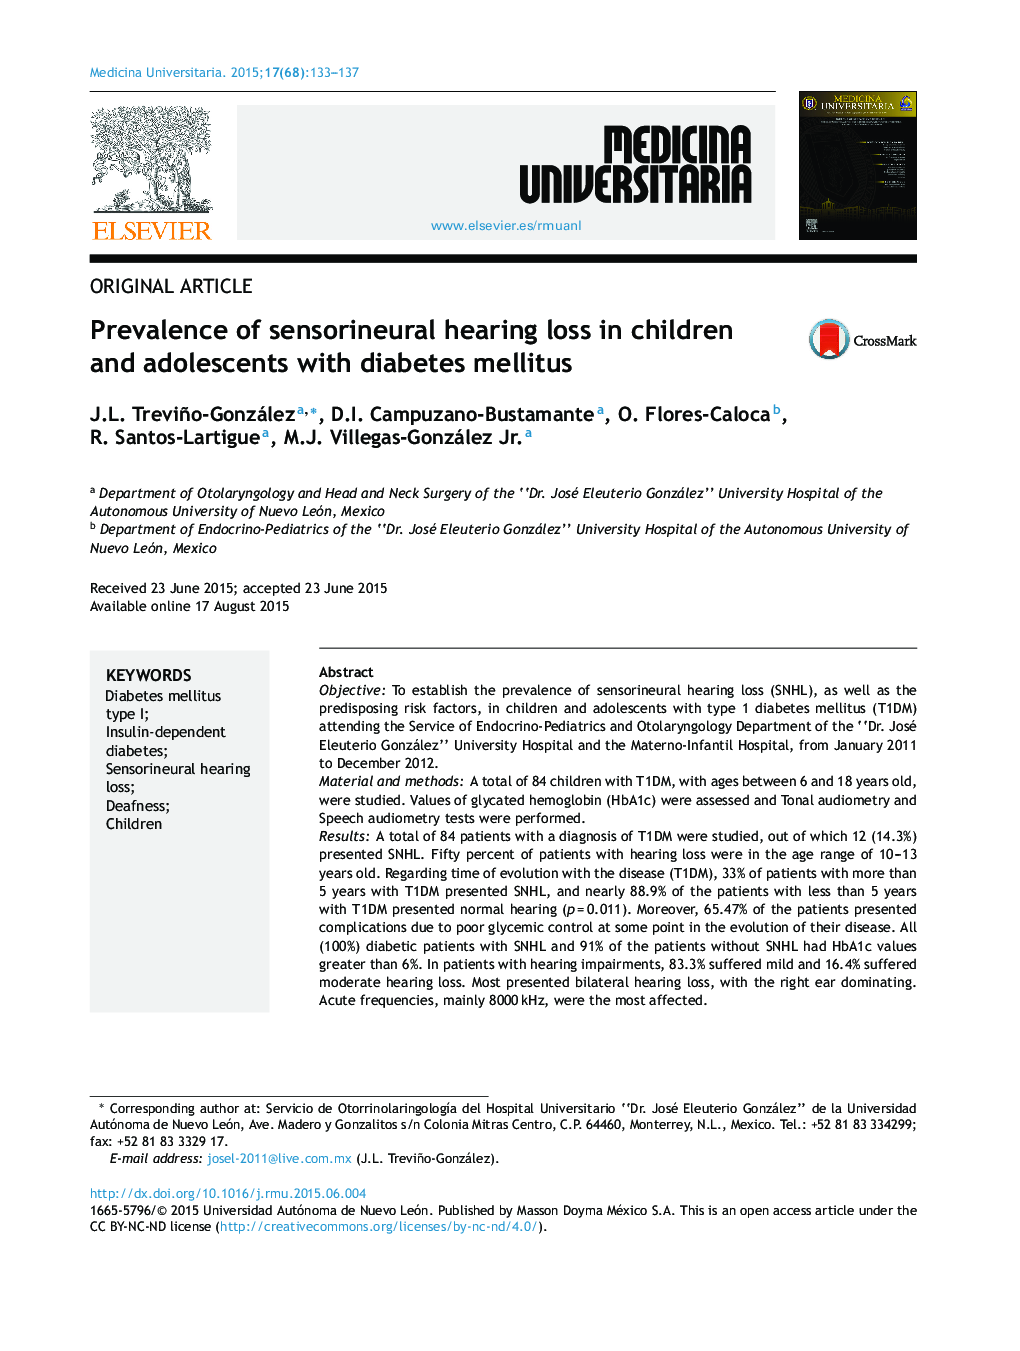 Prevalence of sensorineural hearing loss in children and adolescents with diabetes mellitus